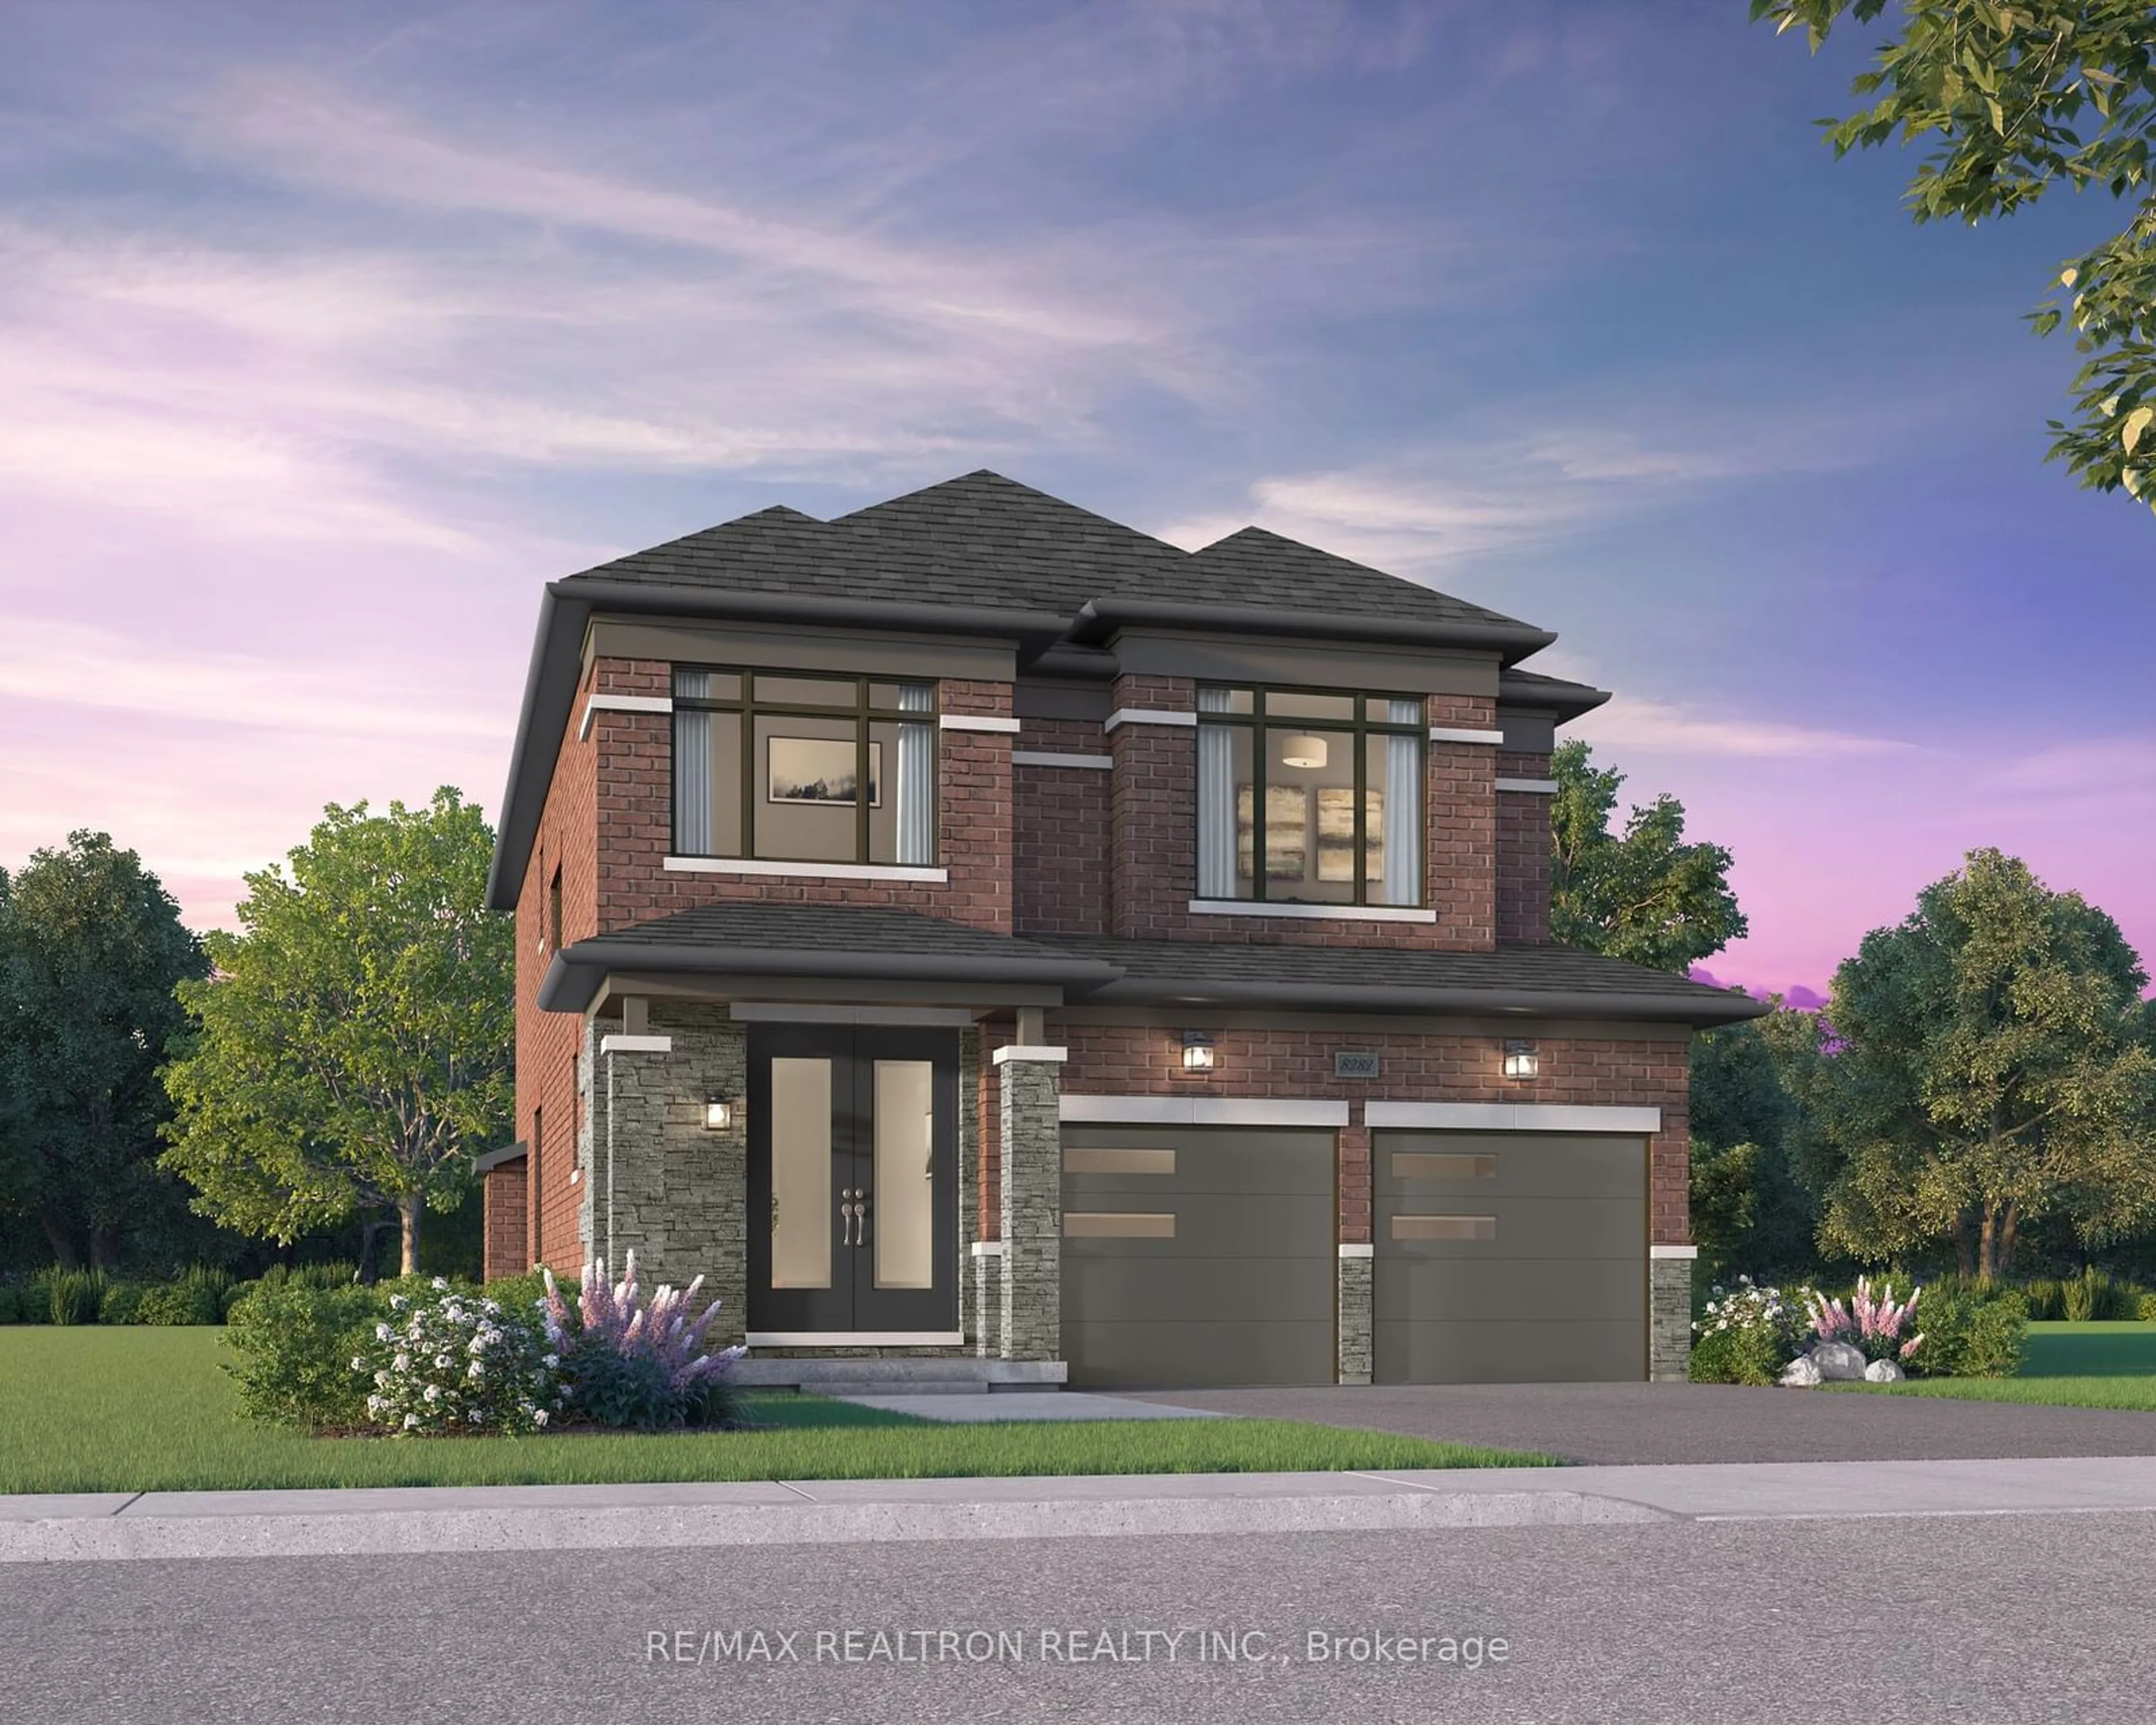 Home with brick exterior material for 30 SWEET CICELY St, Springwater Ontario L9X 2C7